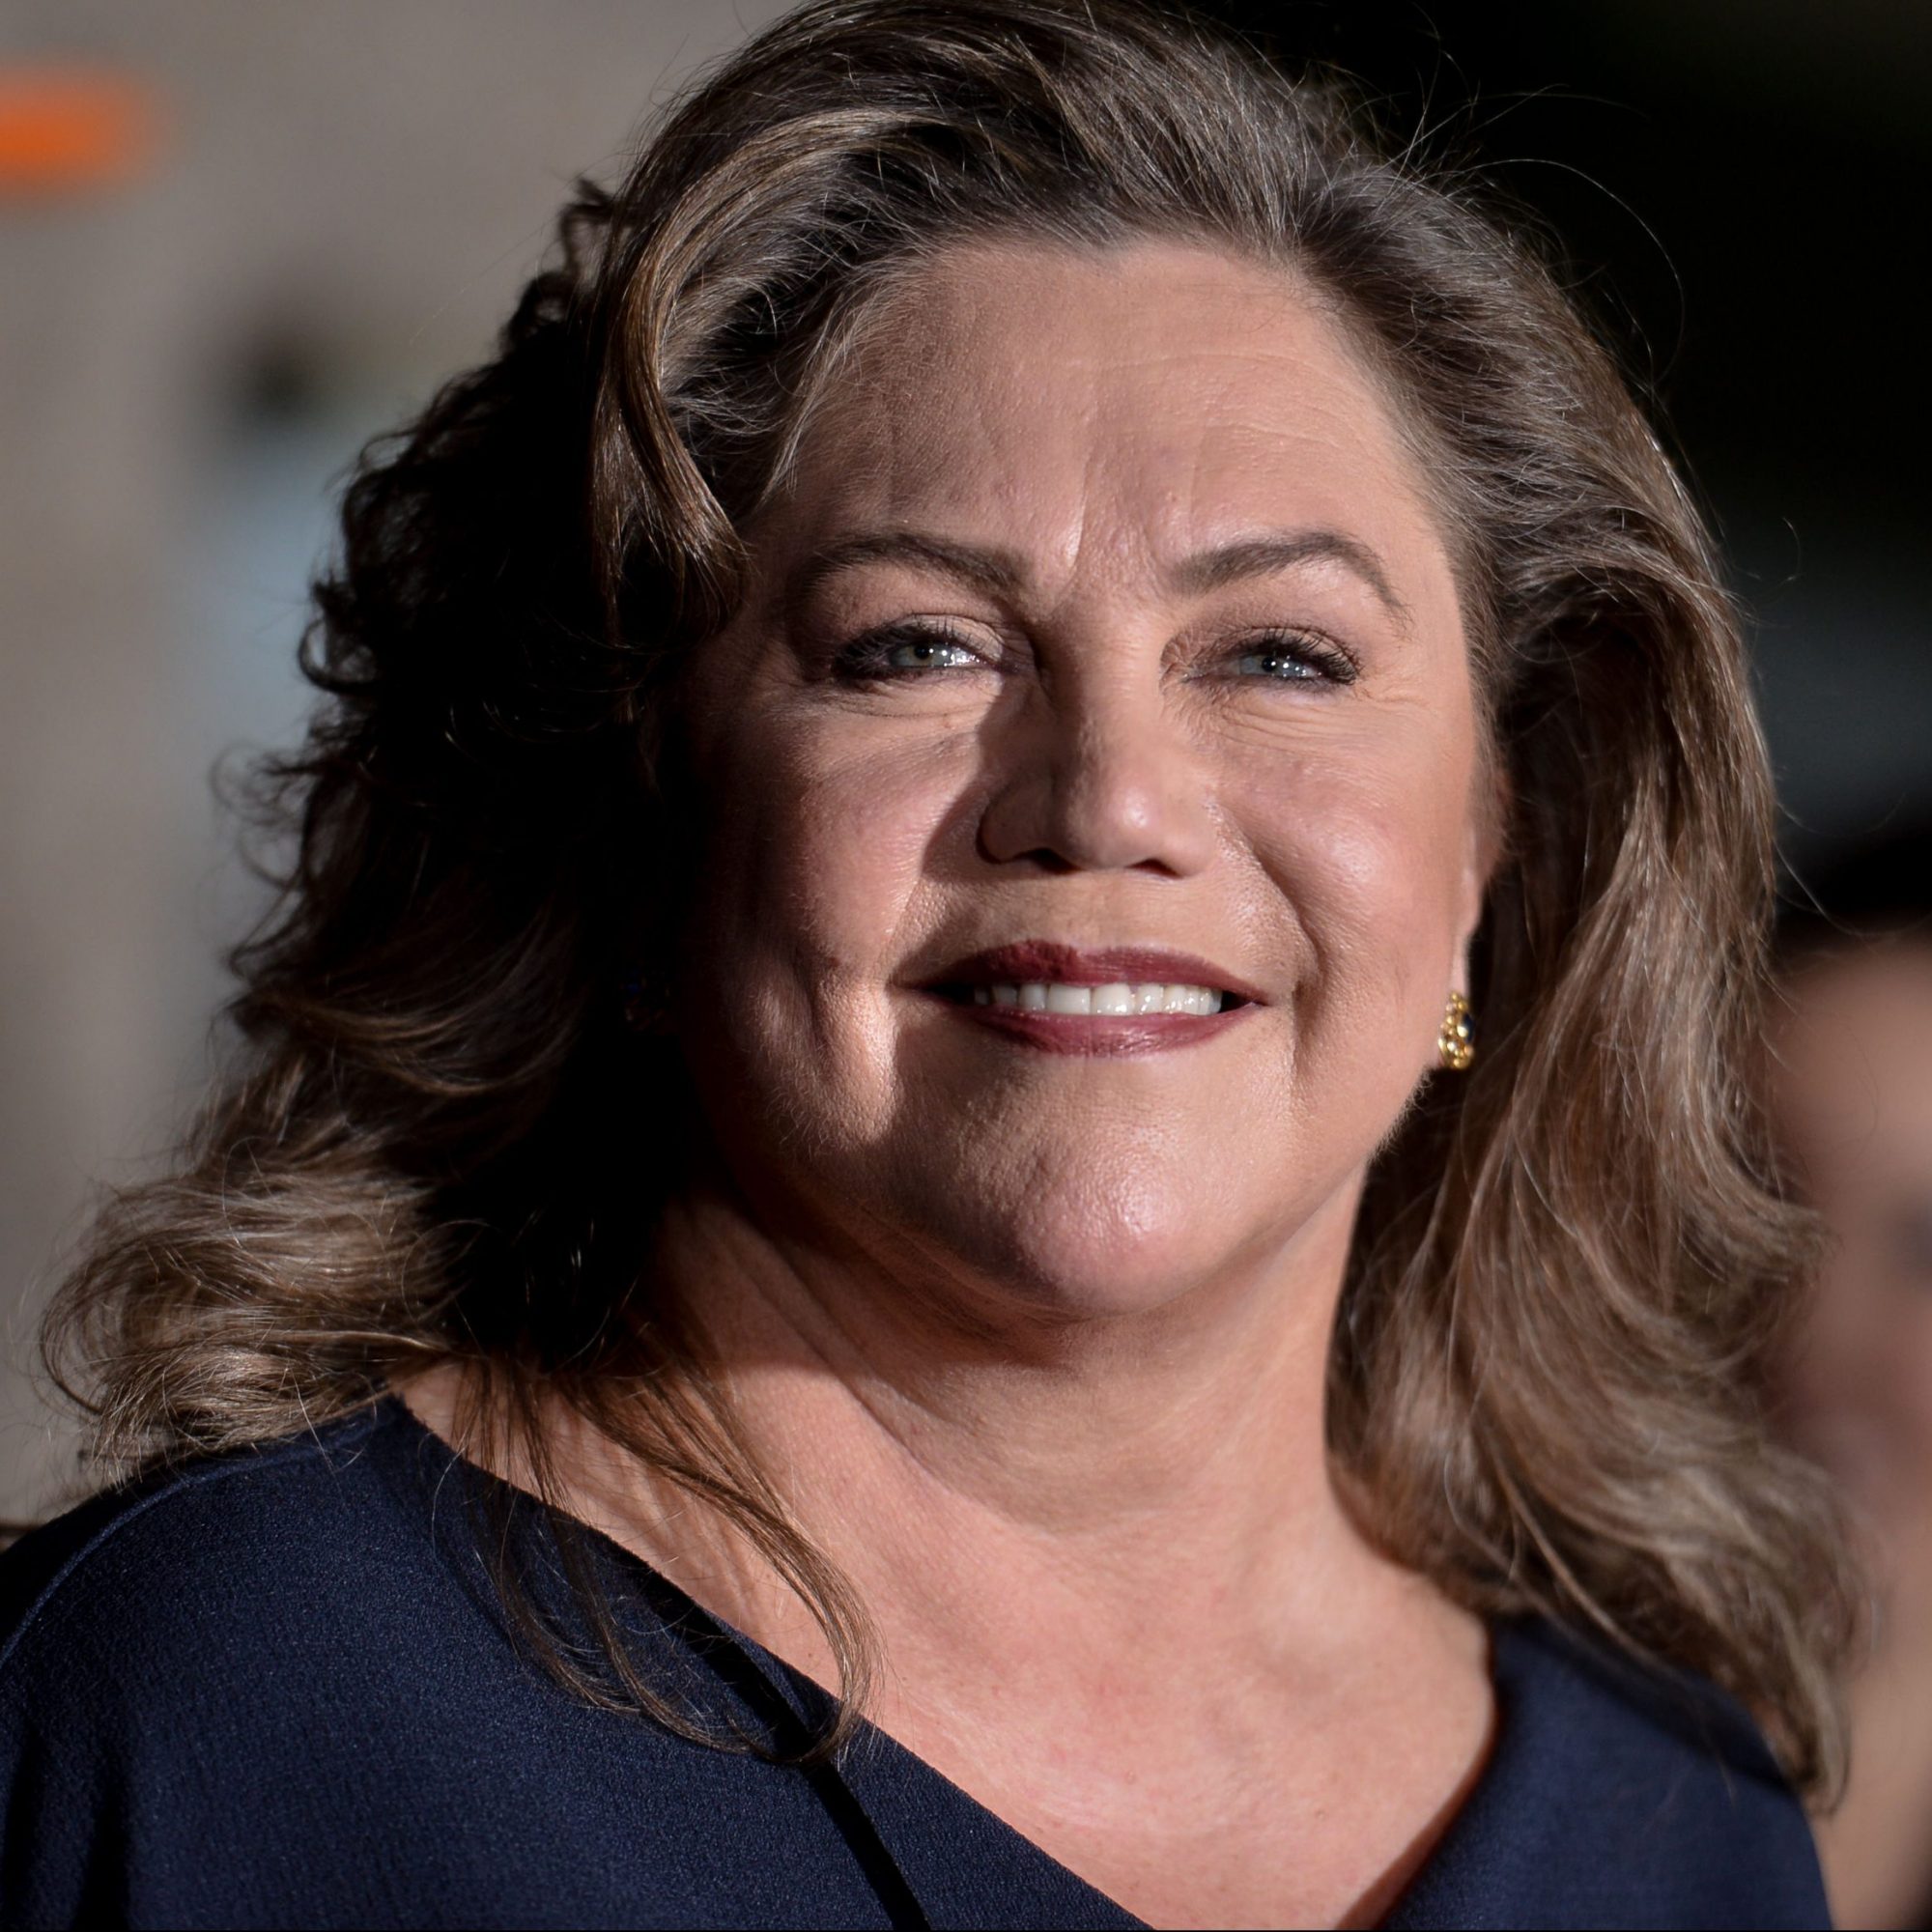 20 Things You Probably Didn't Know About Kathleen Turner 59.